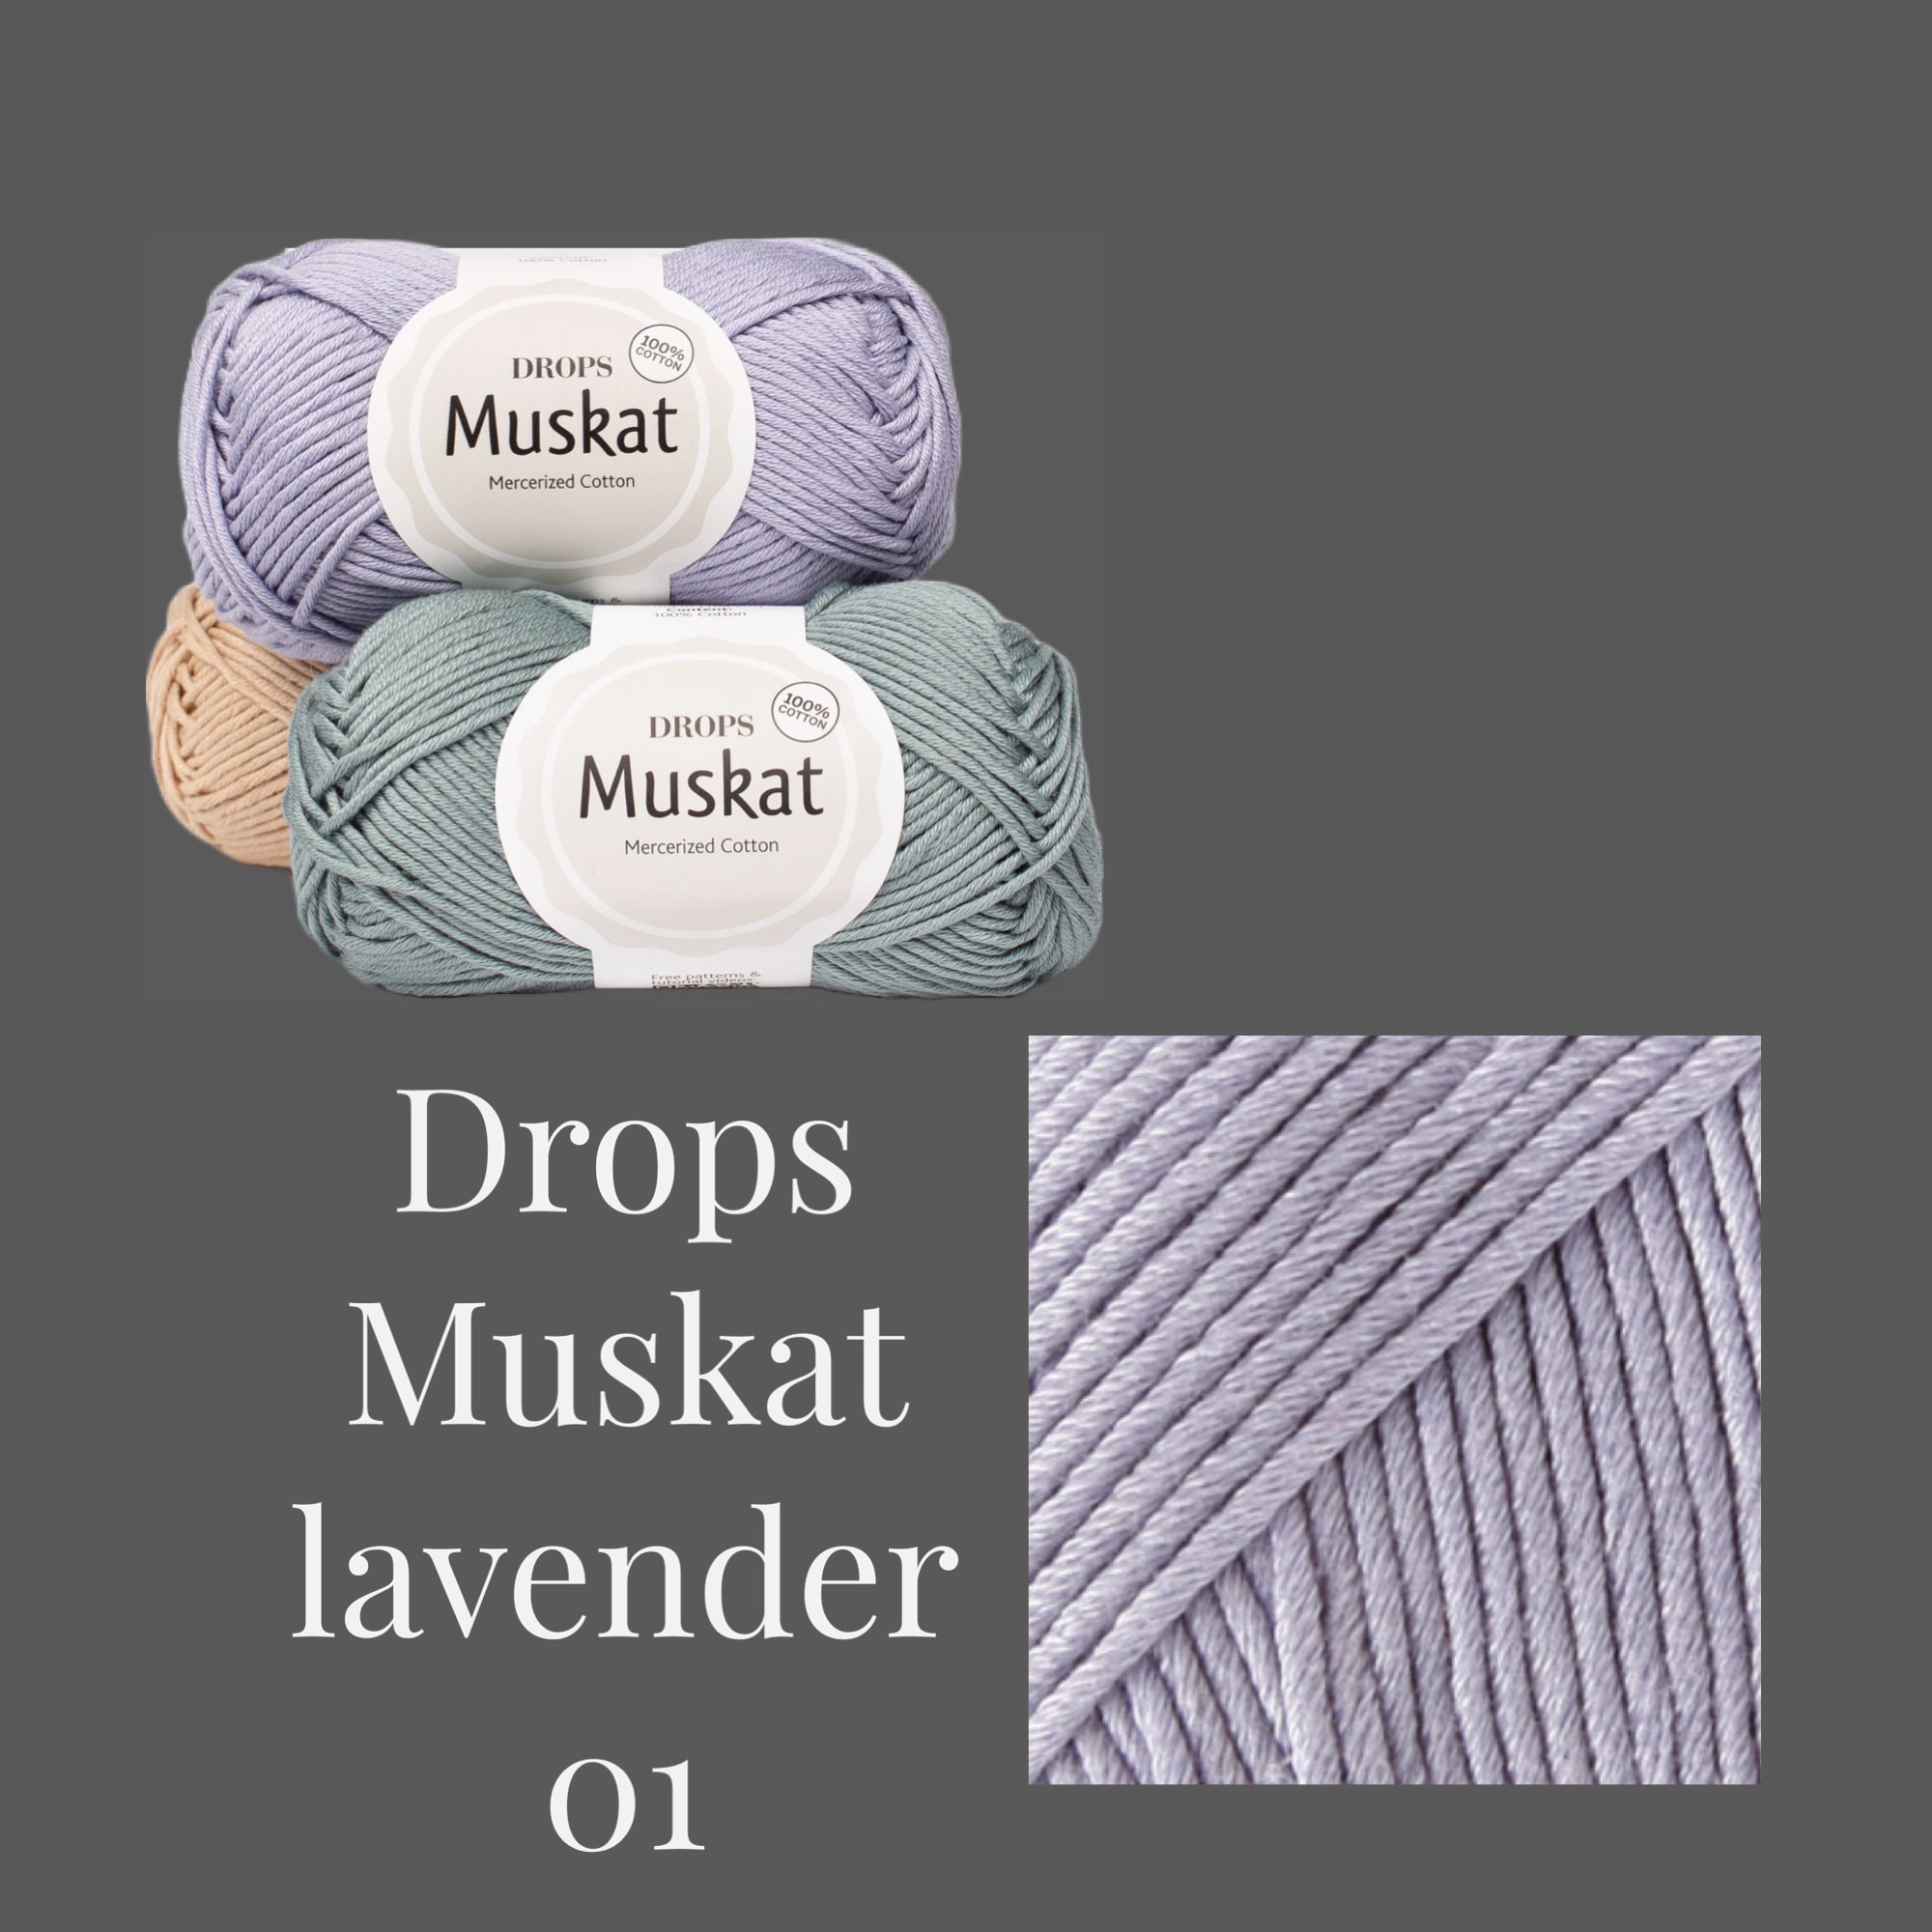 DROPS Muskat - Mercerized cotton with a colorful shine!